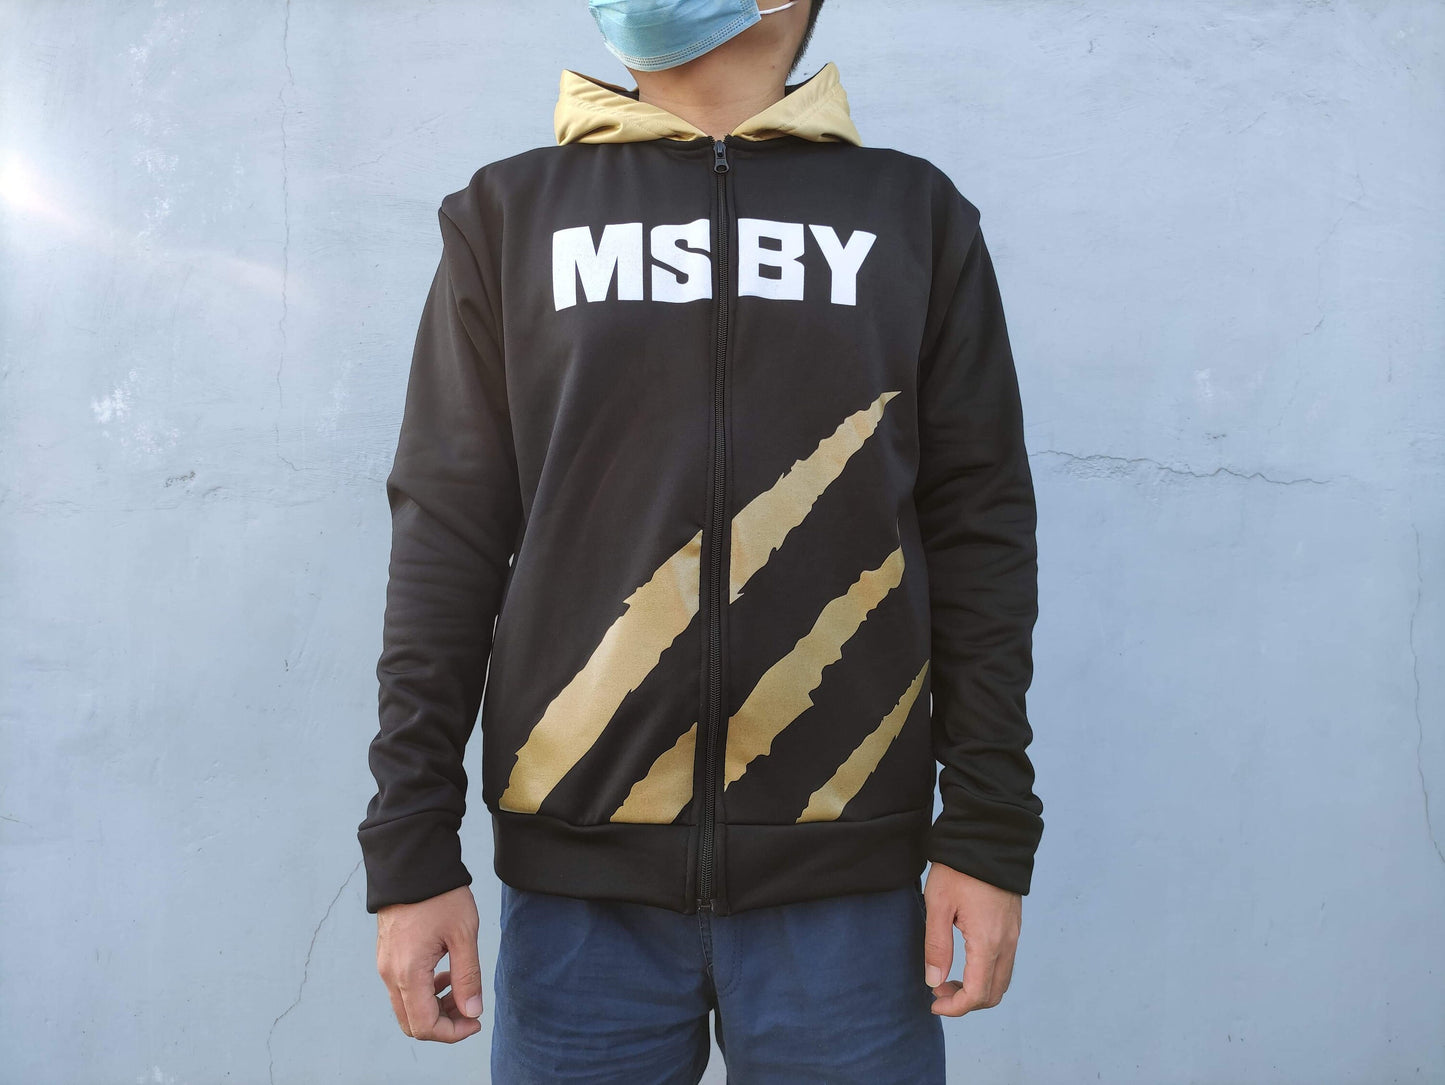 MSBY Inspired Hoodie